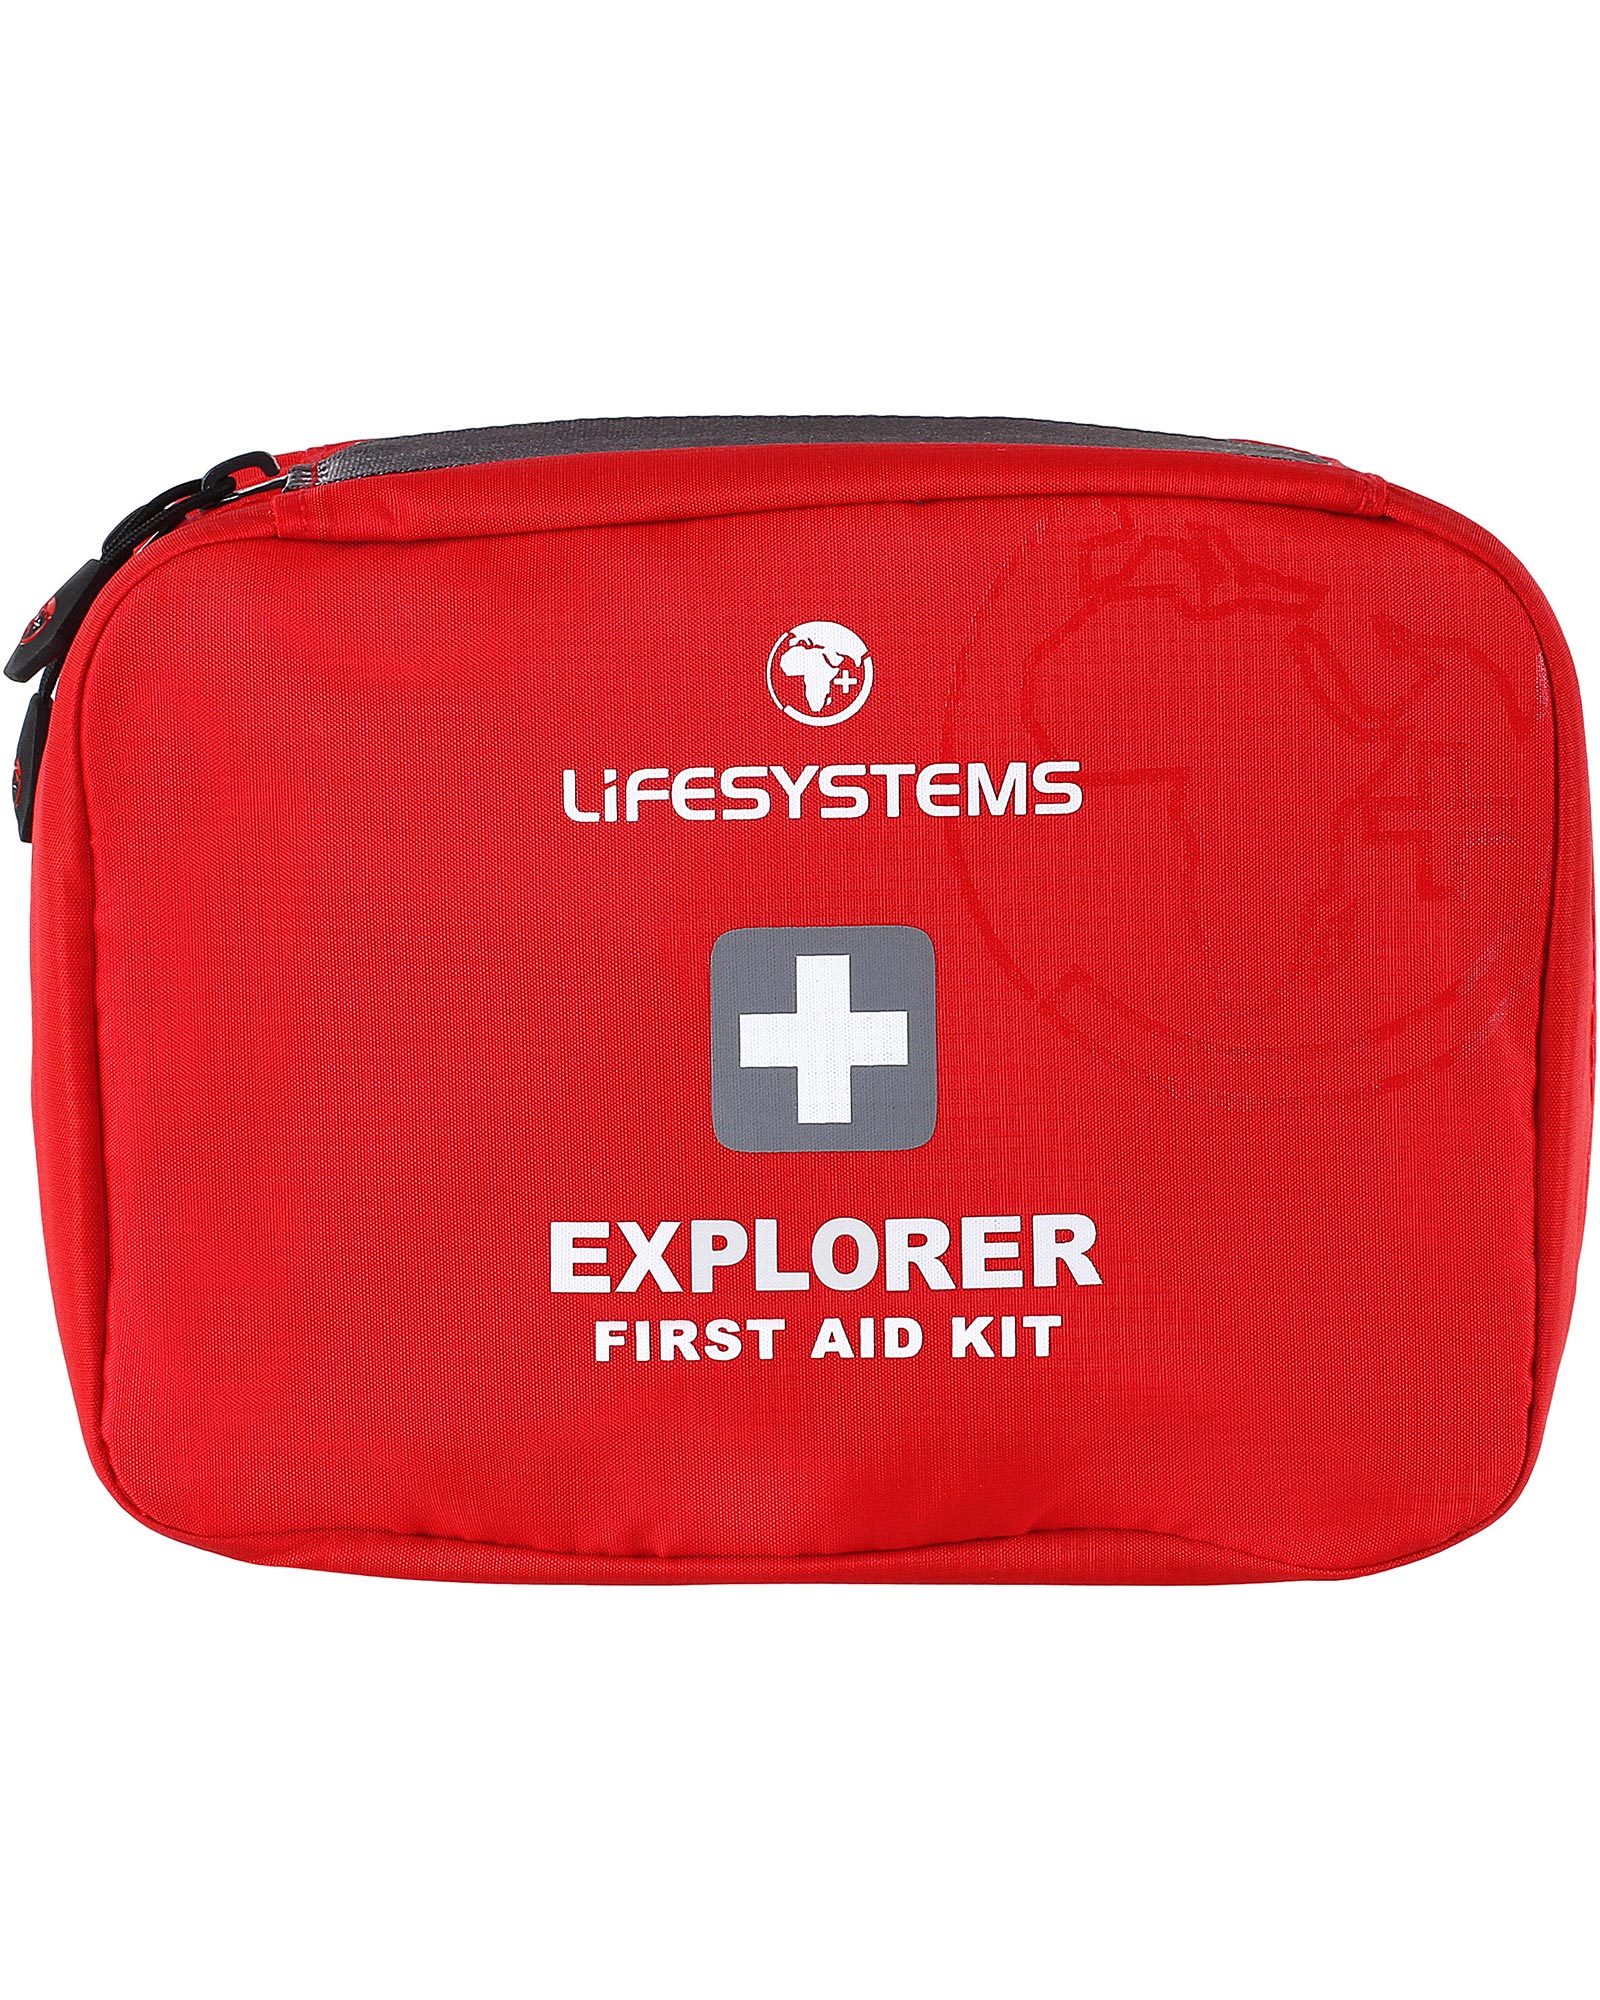 Product image of Lifesystems explorer First Aid Kit